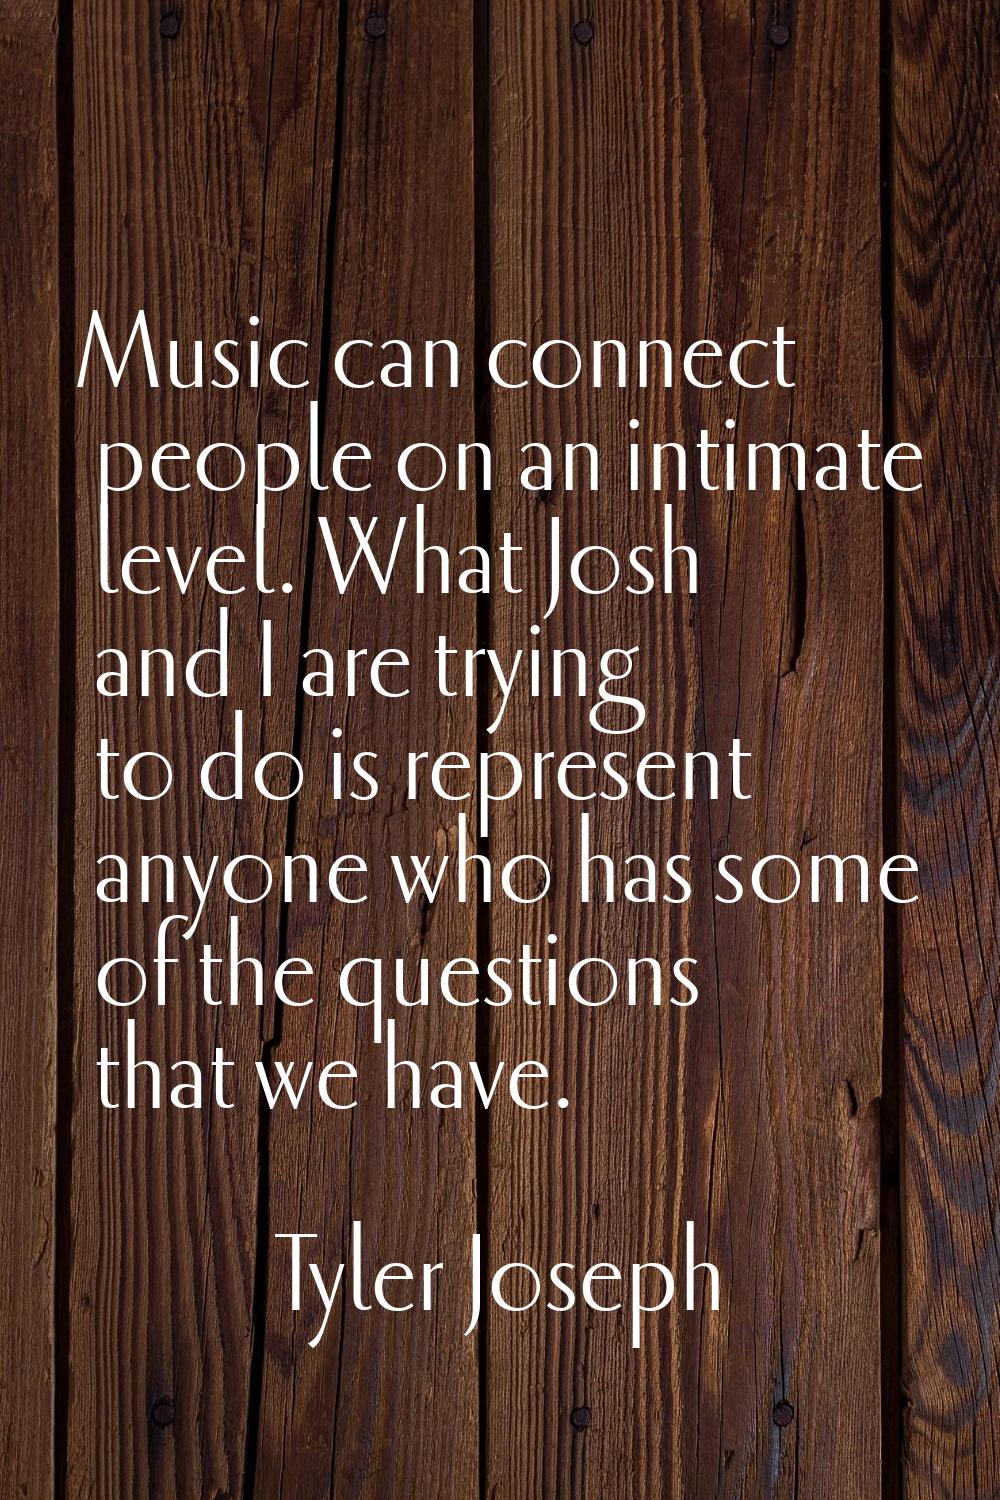 Music can connect people on an intimate level. What Josh and I are trying to do is represent anyone